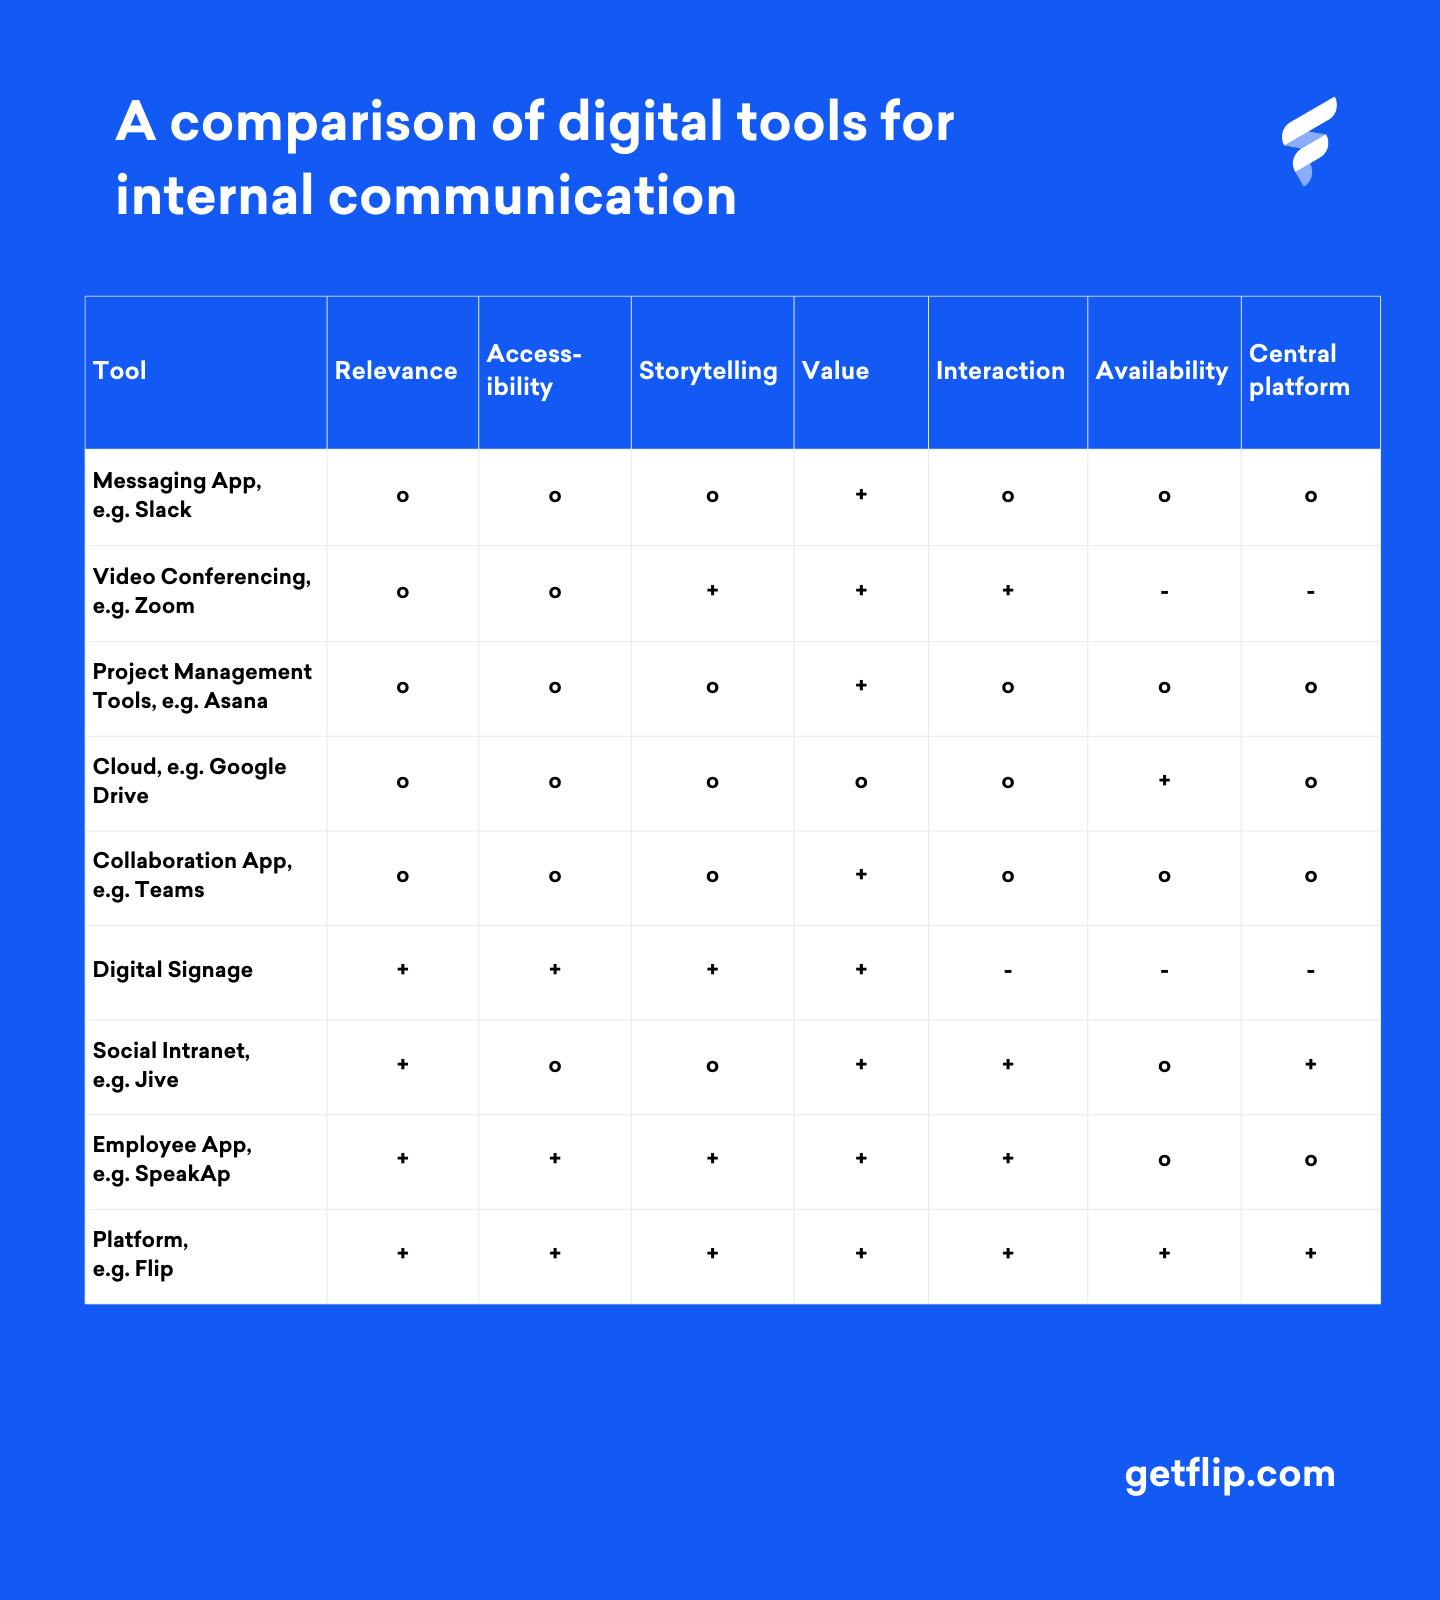 A comparison of digital tools for internal communication